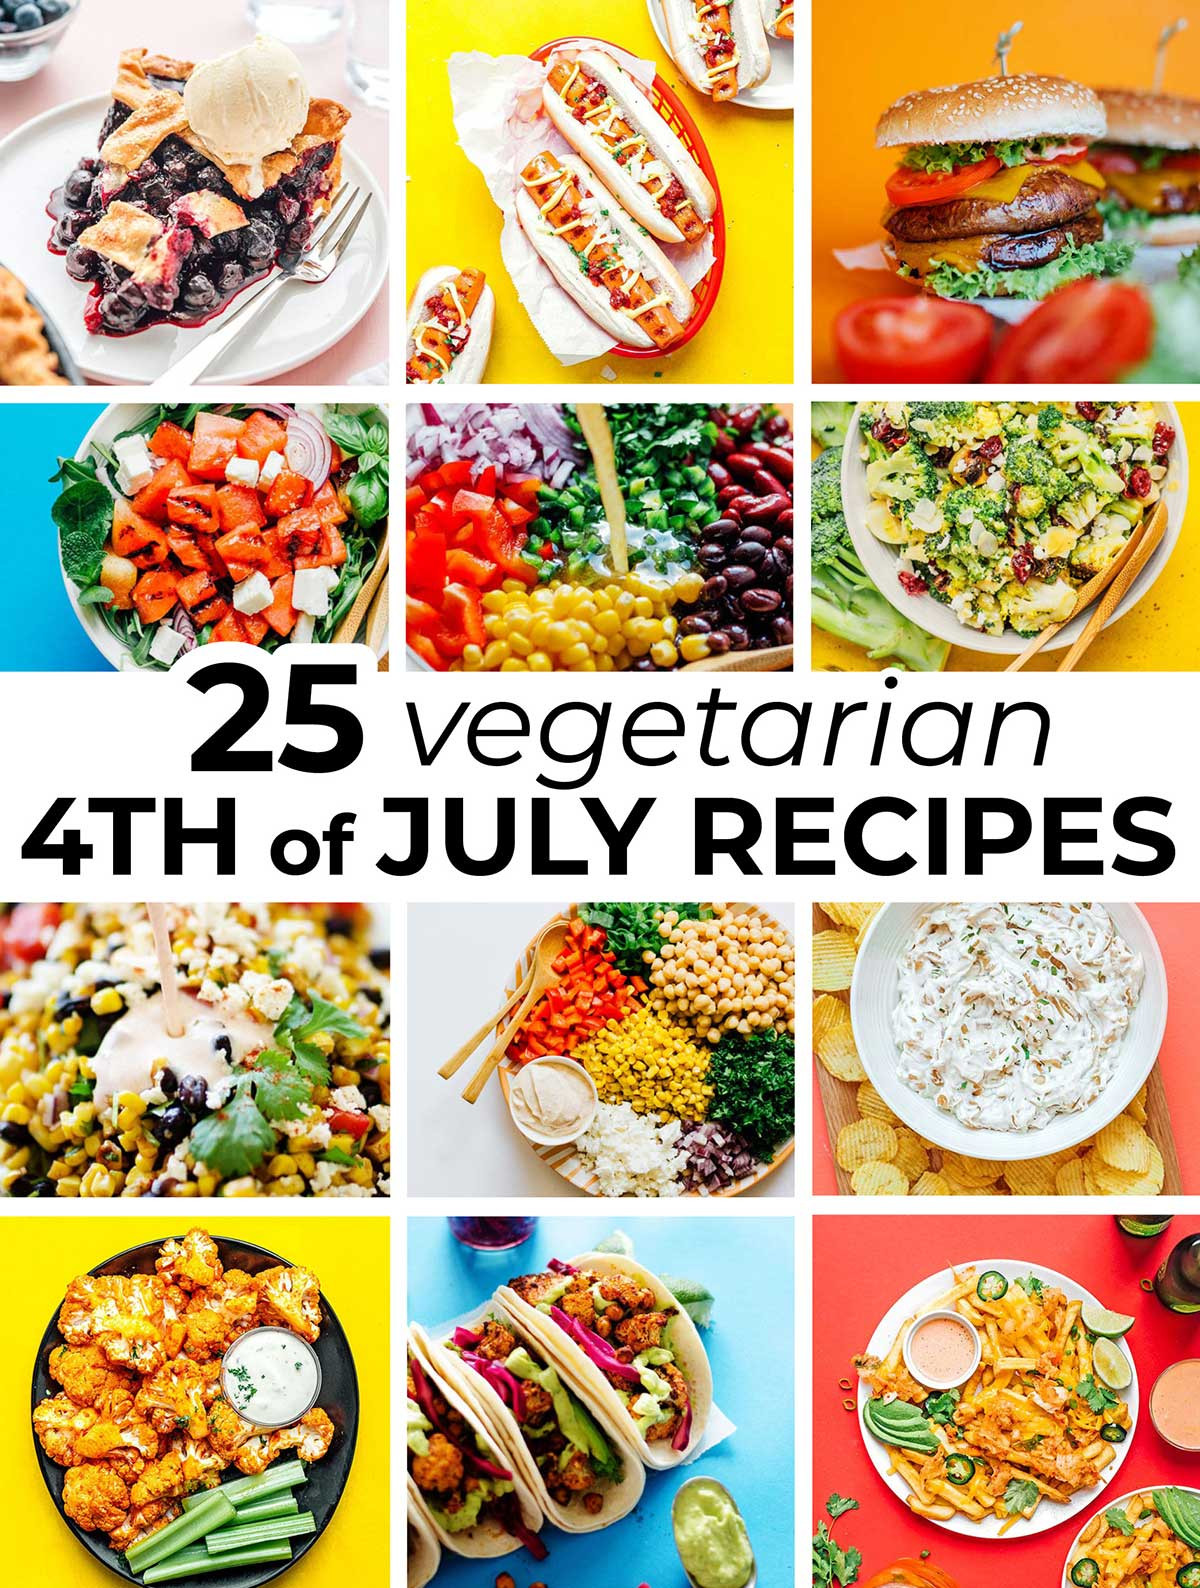 Vegetarian 4Th Of July Recipes
 25 Ve arian 4th of July Recipes for a Meatless